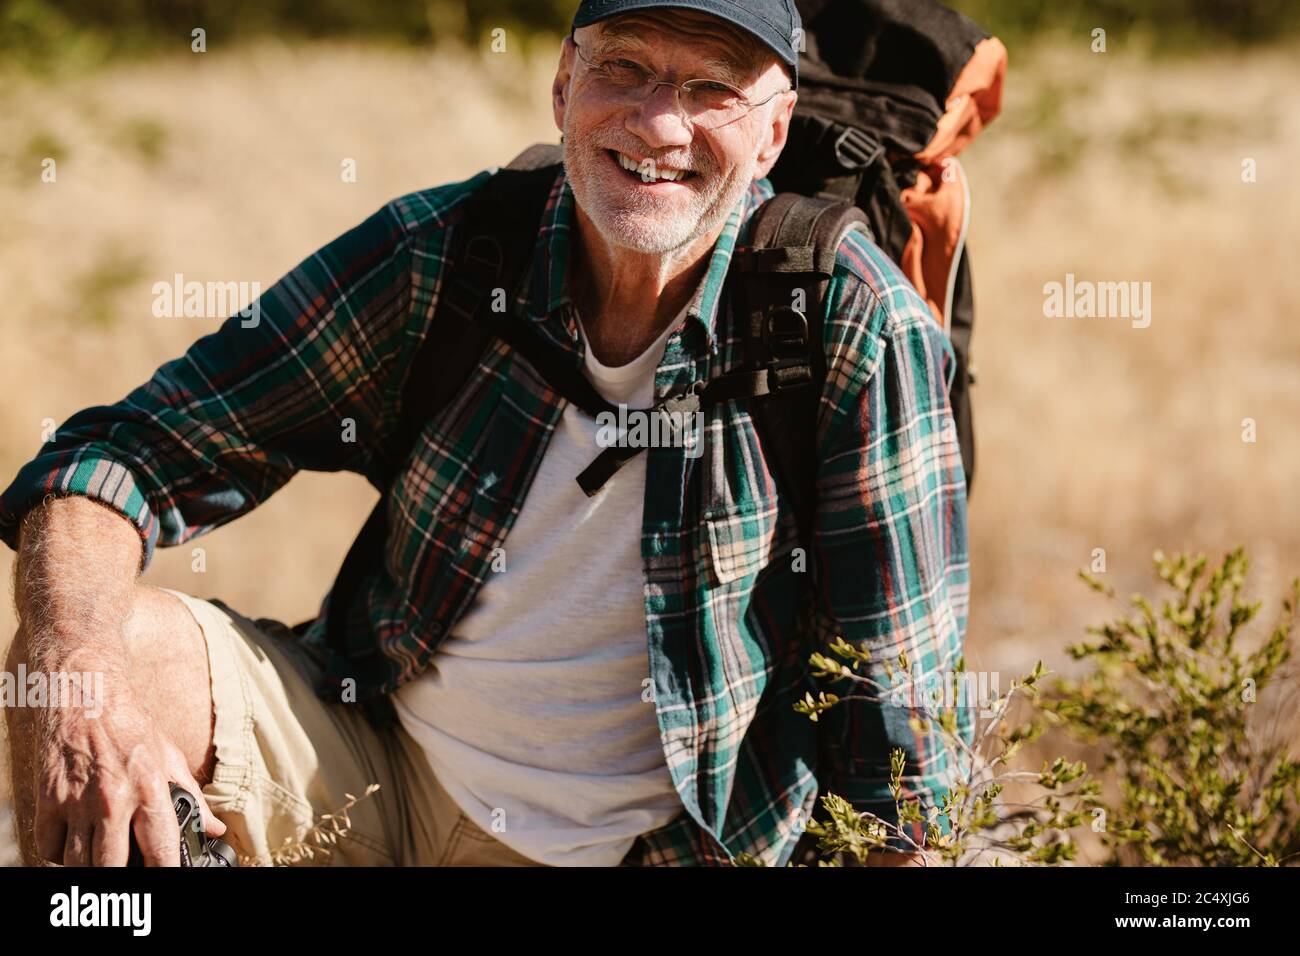 Portrait of a senior man carrying a backpack looking at camera and smiling. Retired male hiker taking a break, sitting on ground. Stock Photo